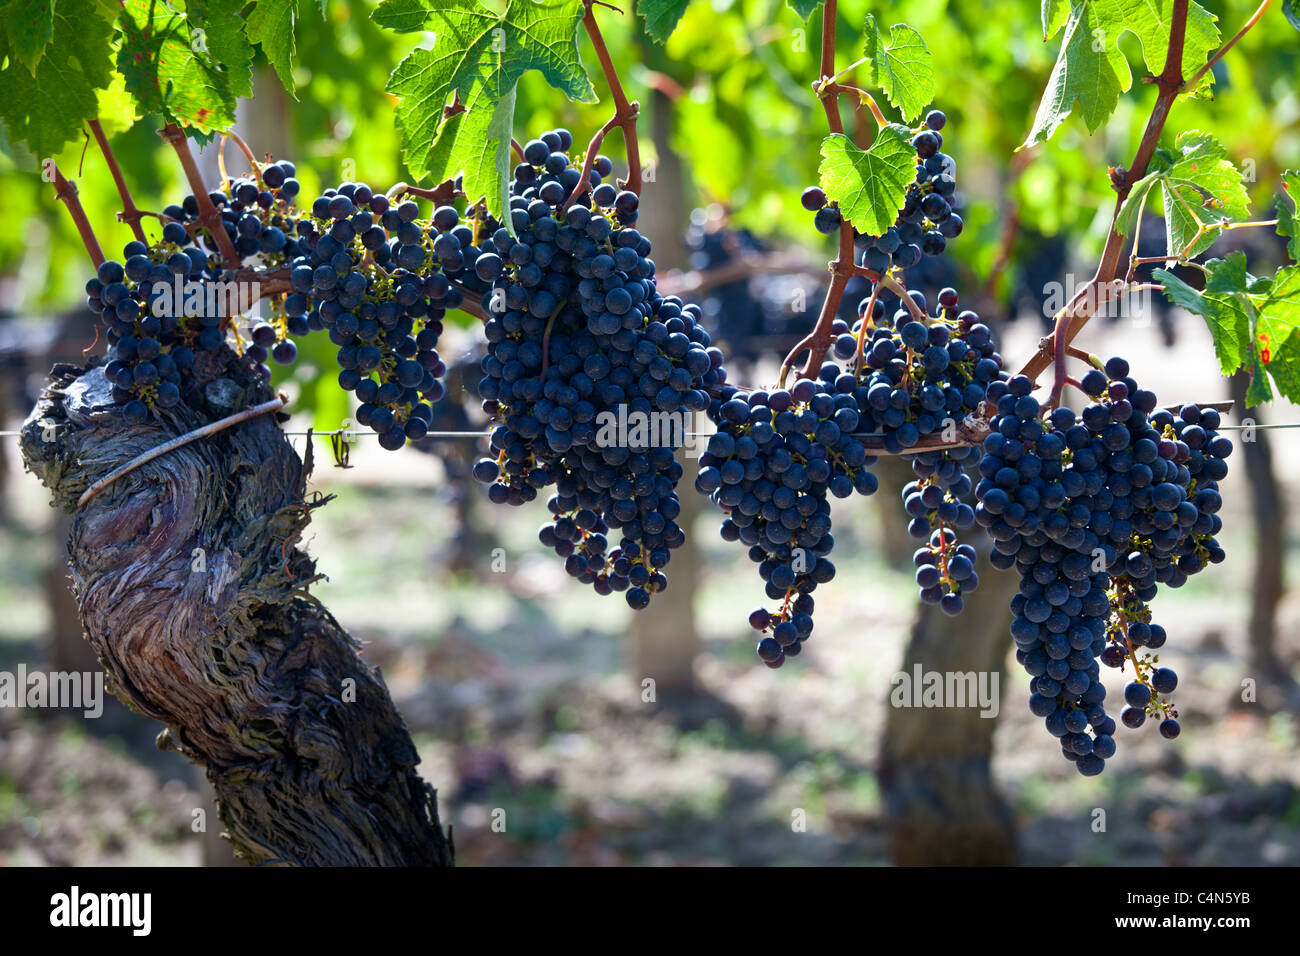 Ripe Merlot grapes at the famous Chateau Petrus wine estate at Pomerol in the Bordeaux region of France Stock Photo